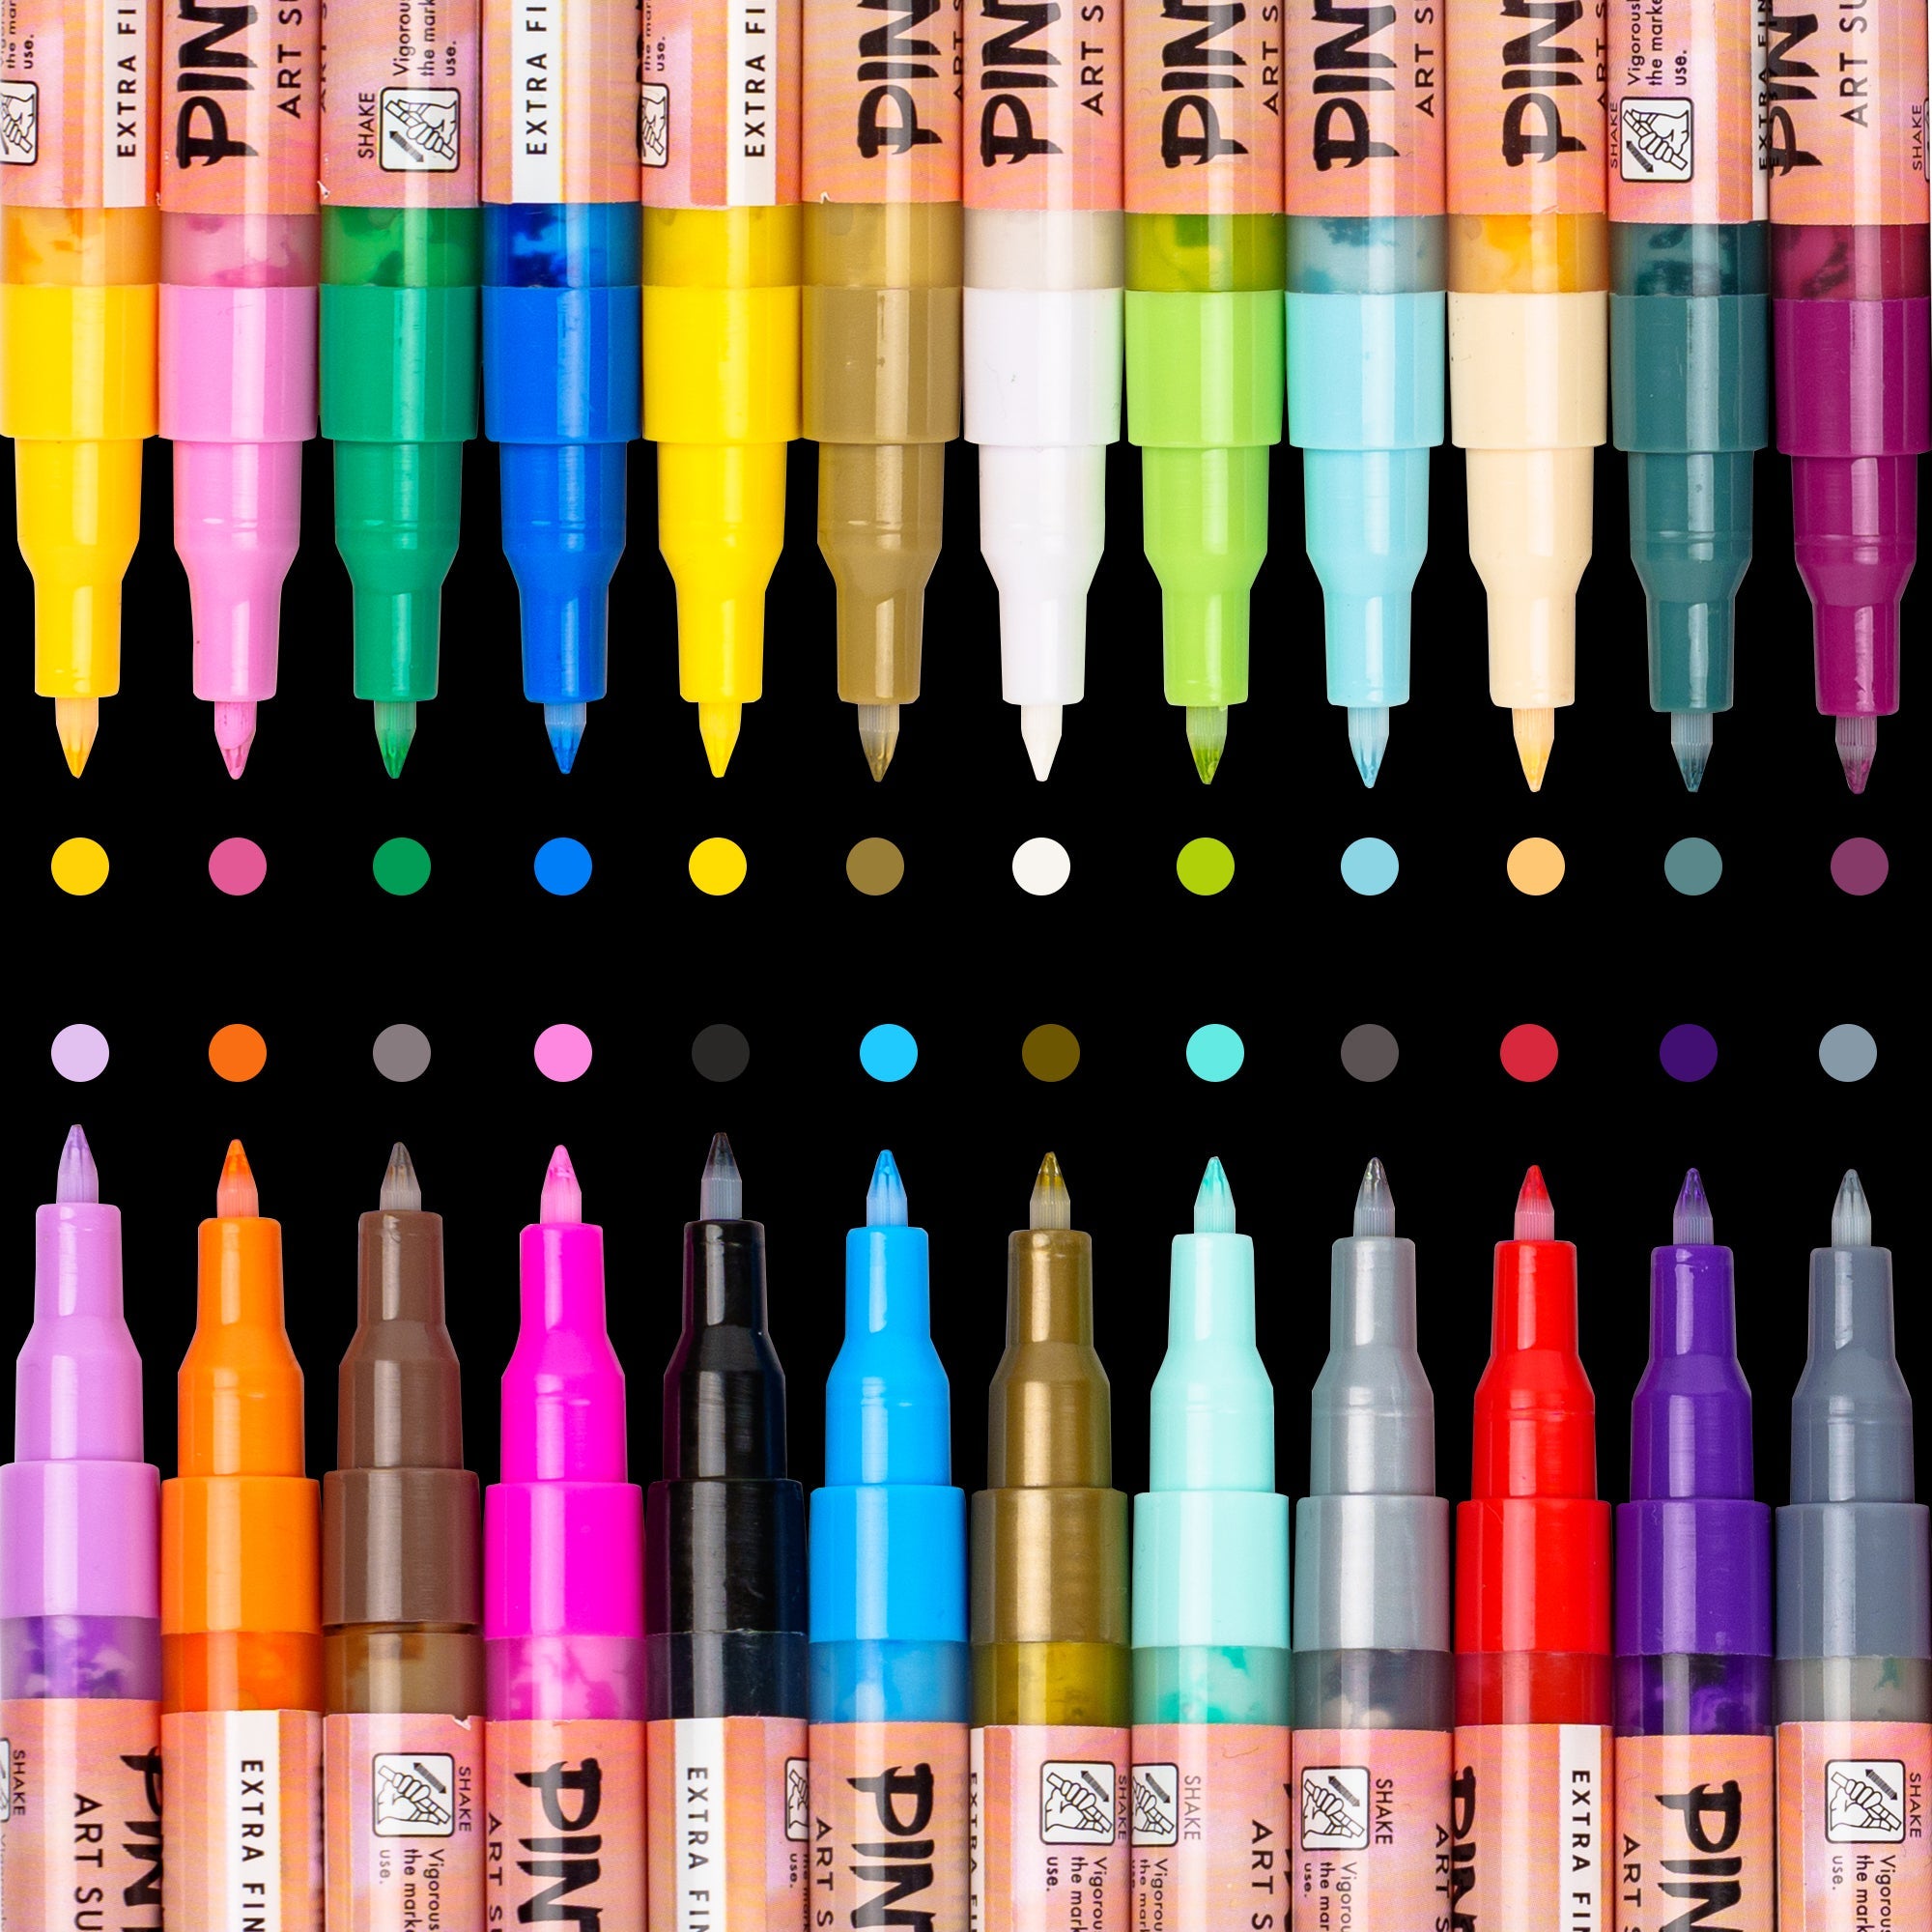 24 Paint Pens 12 Acrylic Extra Fine Tip Paint Pens 12 Gold & Silver Paint  Pens for Rocks, Wood, Glass, Ceramic, Metal Painting 